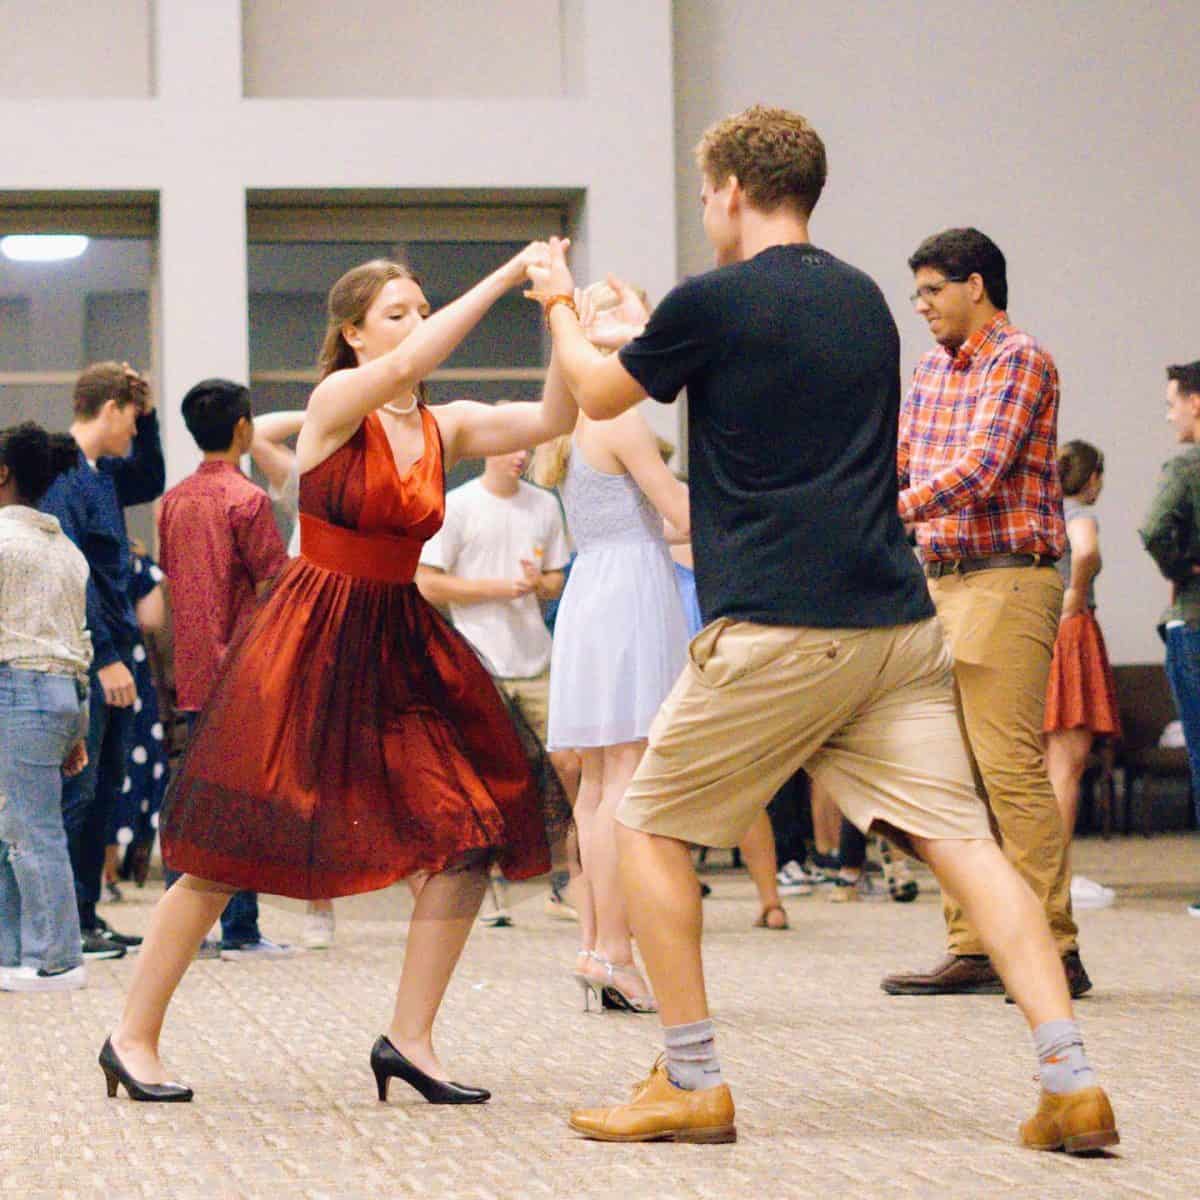 Local dance group keeping the spirit of swing alive at UA